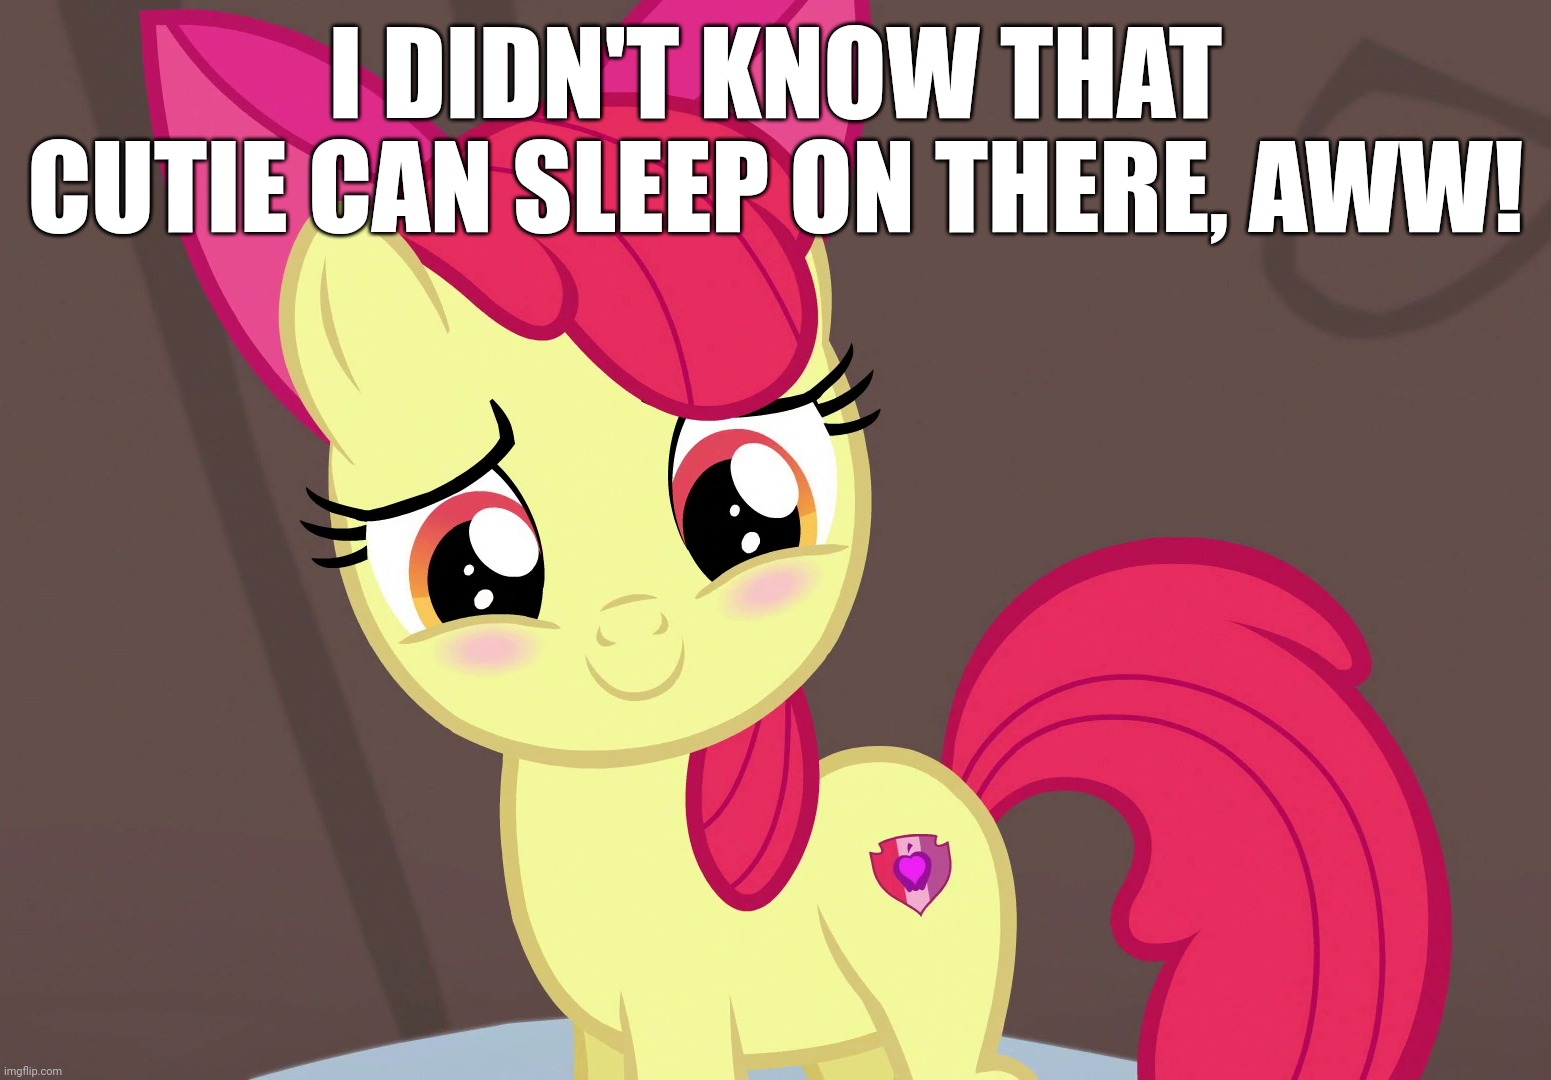 Cute Applebloom (MLP) |  I DIDN'T KNOW THAT CUTIE CAN SLEEP ON THERE, AWW! | image tagged in cute applebloom mlp | made w/ Imgflip meme maker